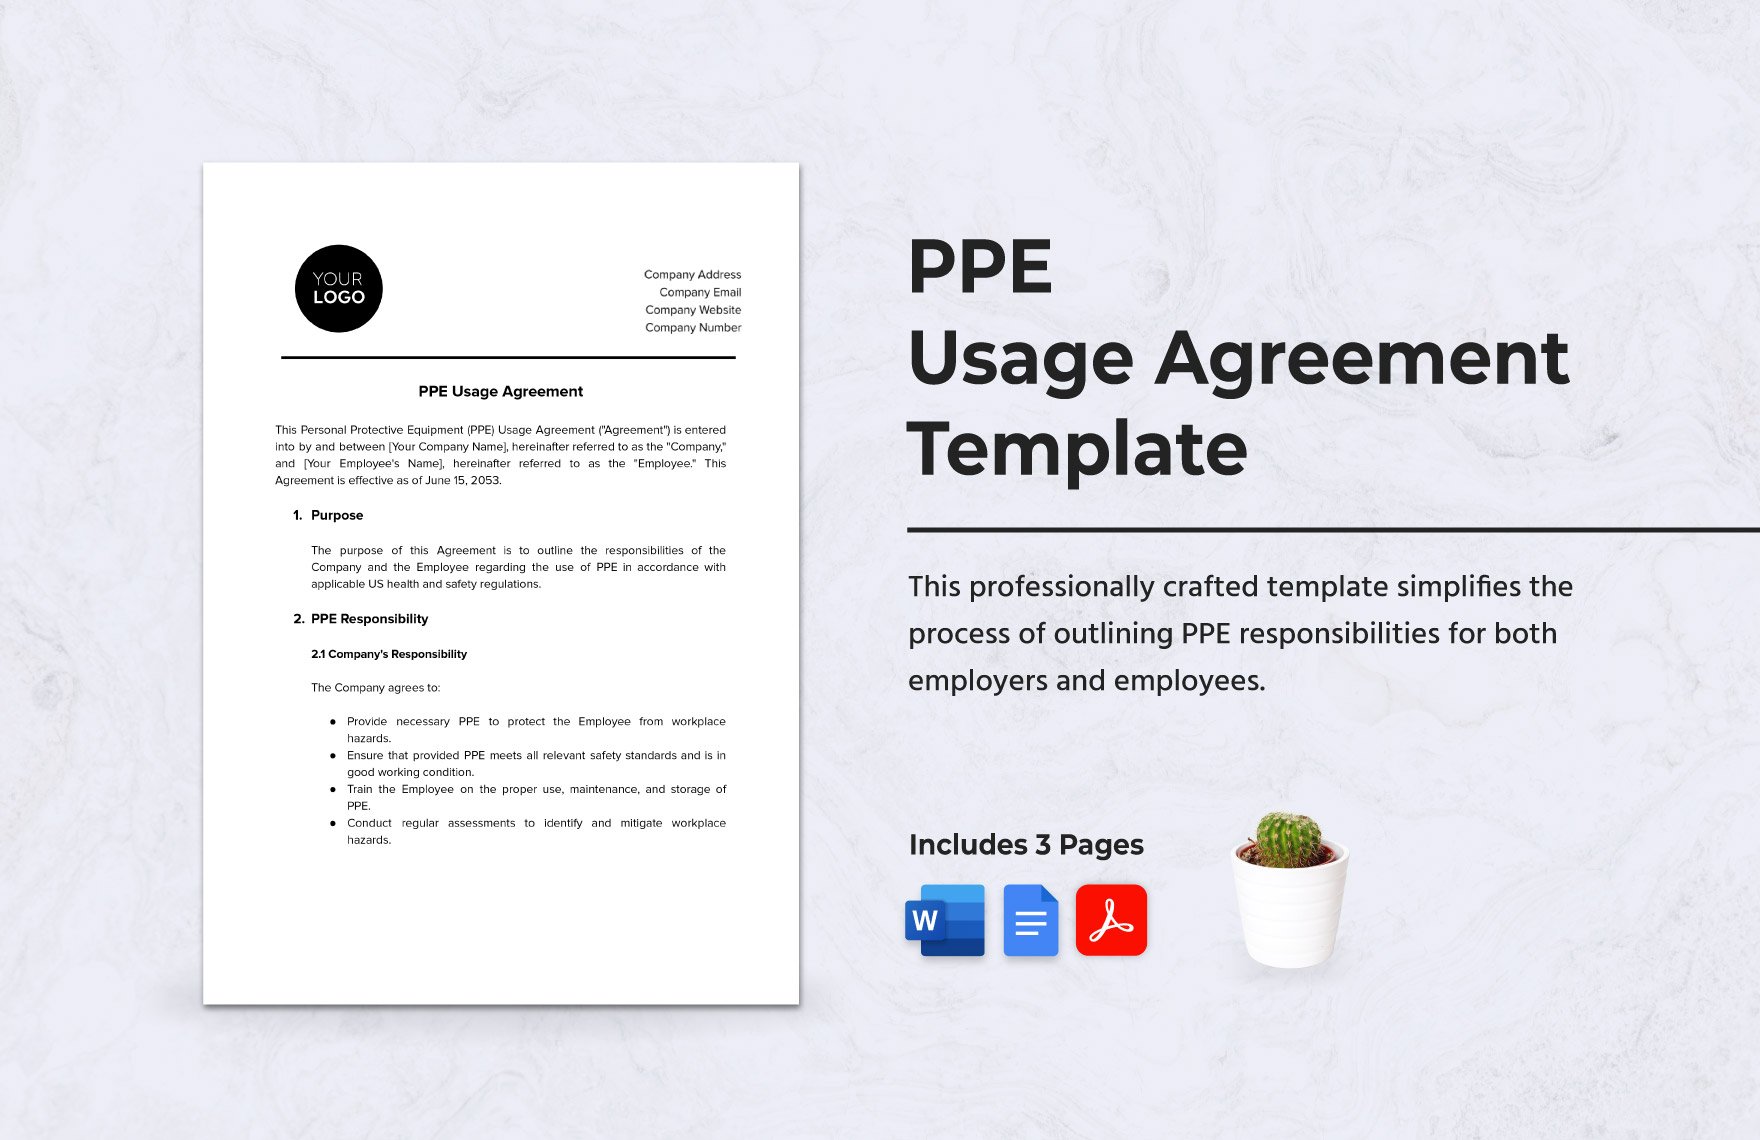 PPE Usage Agreement Template